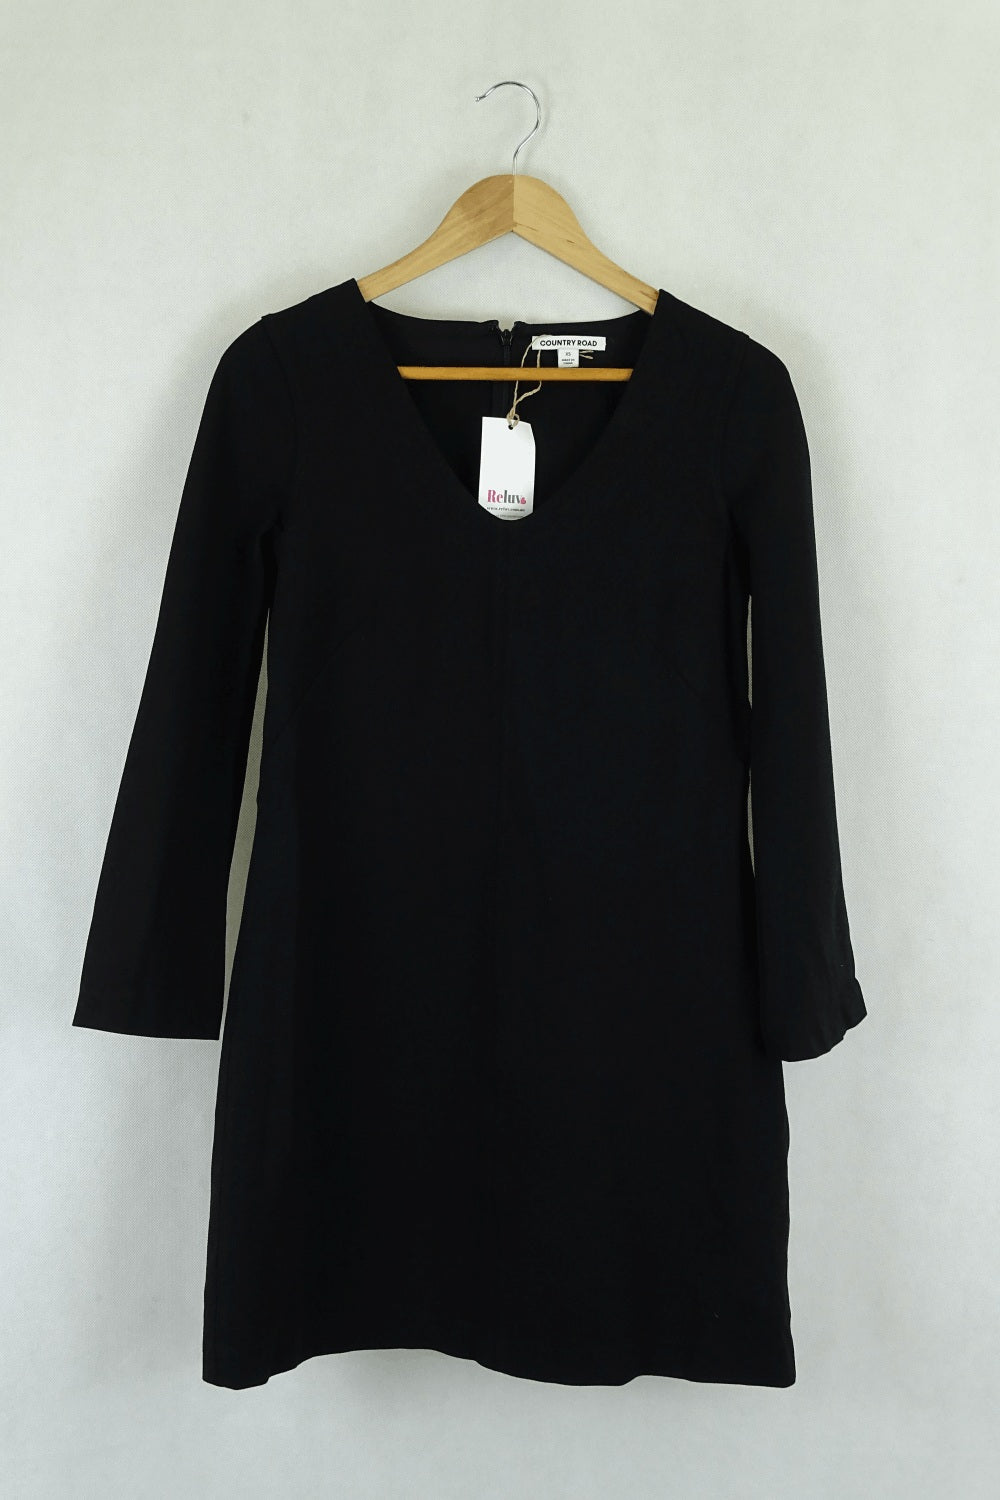 Country Road Black Dress Xs